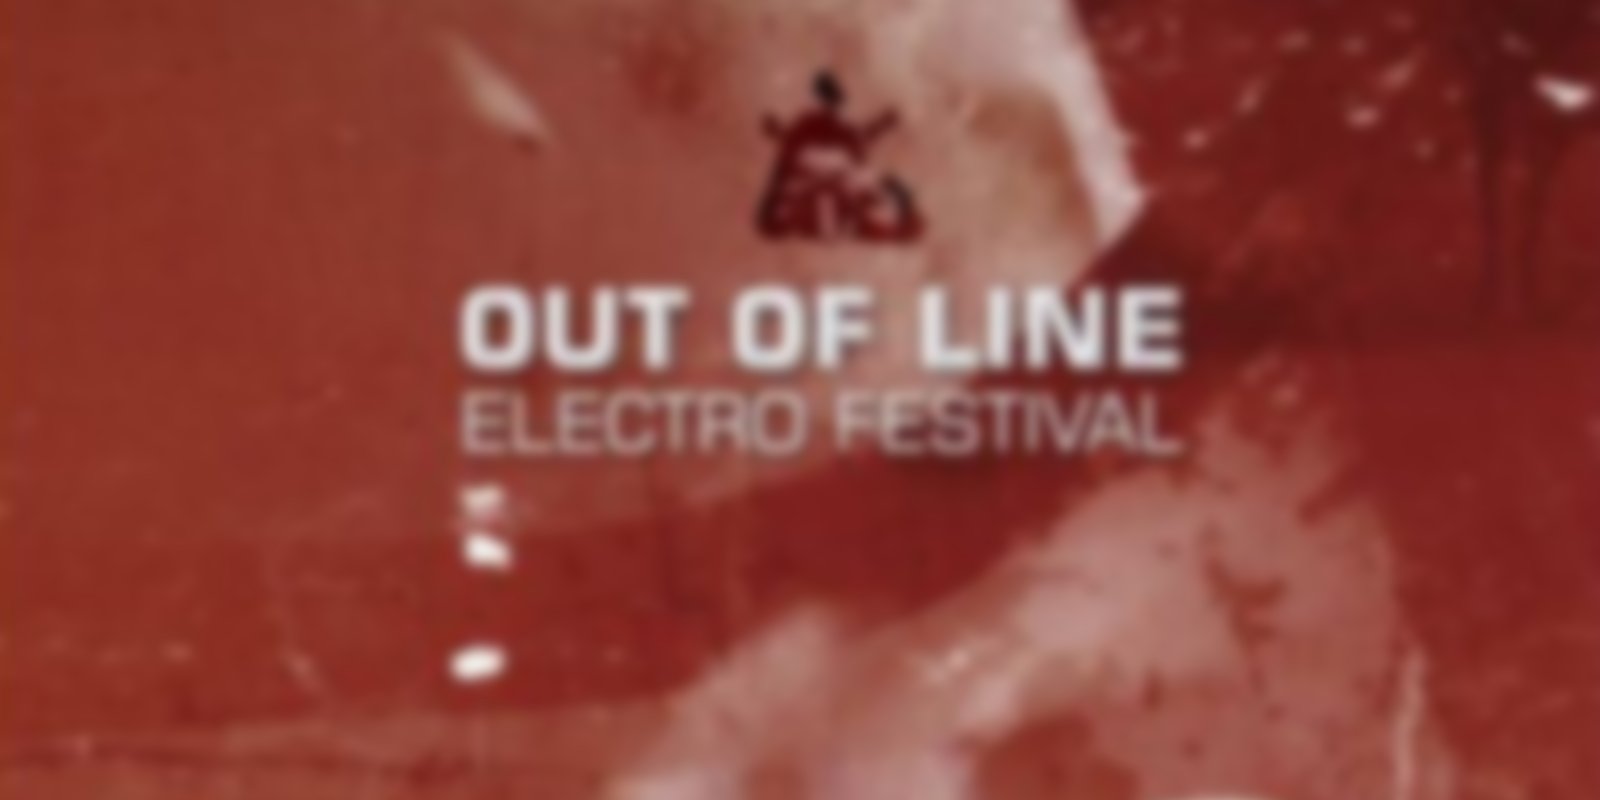 Out of Line - Electro Festival